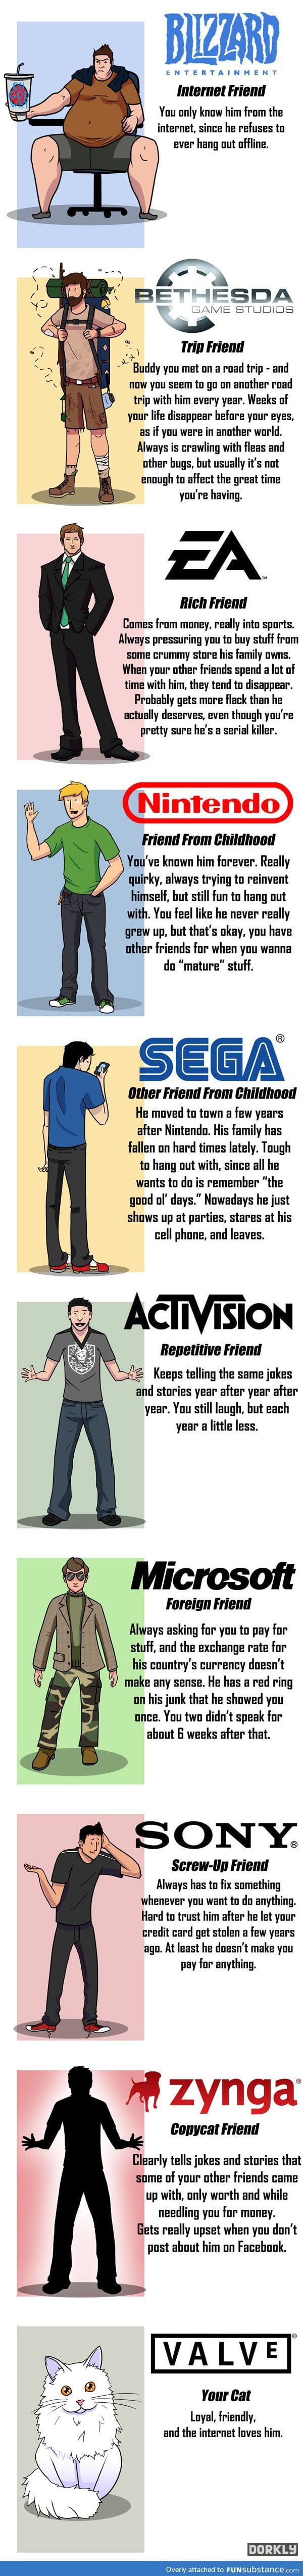 If Video Game Companies were people...